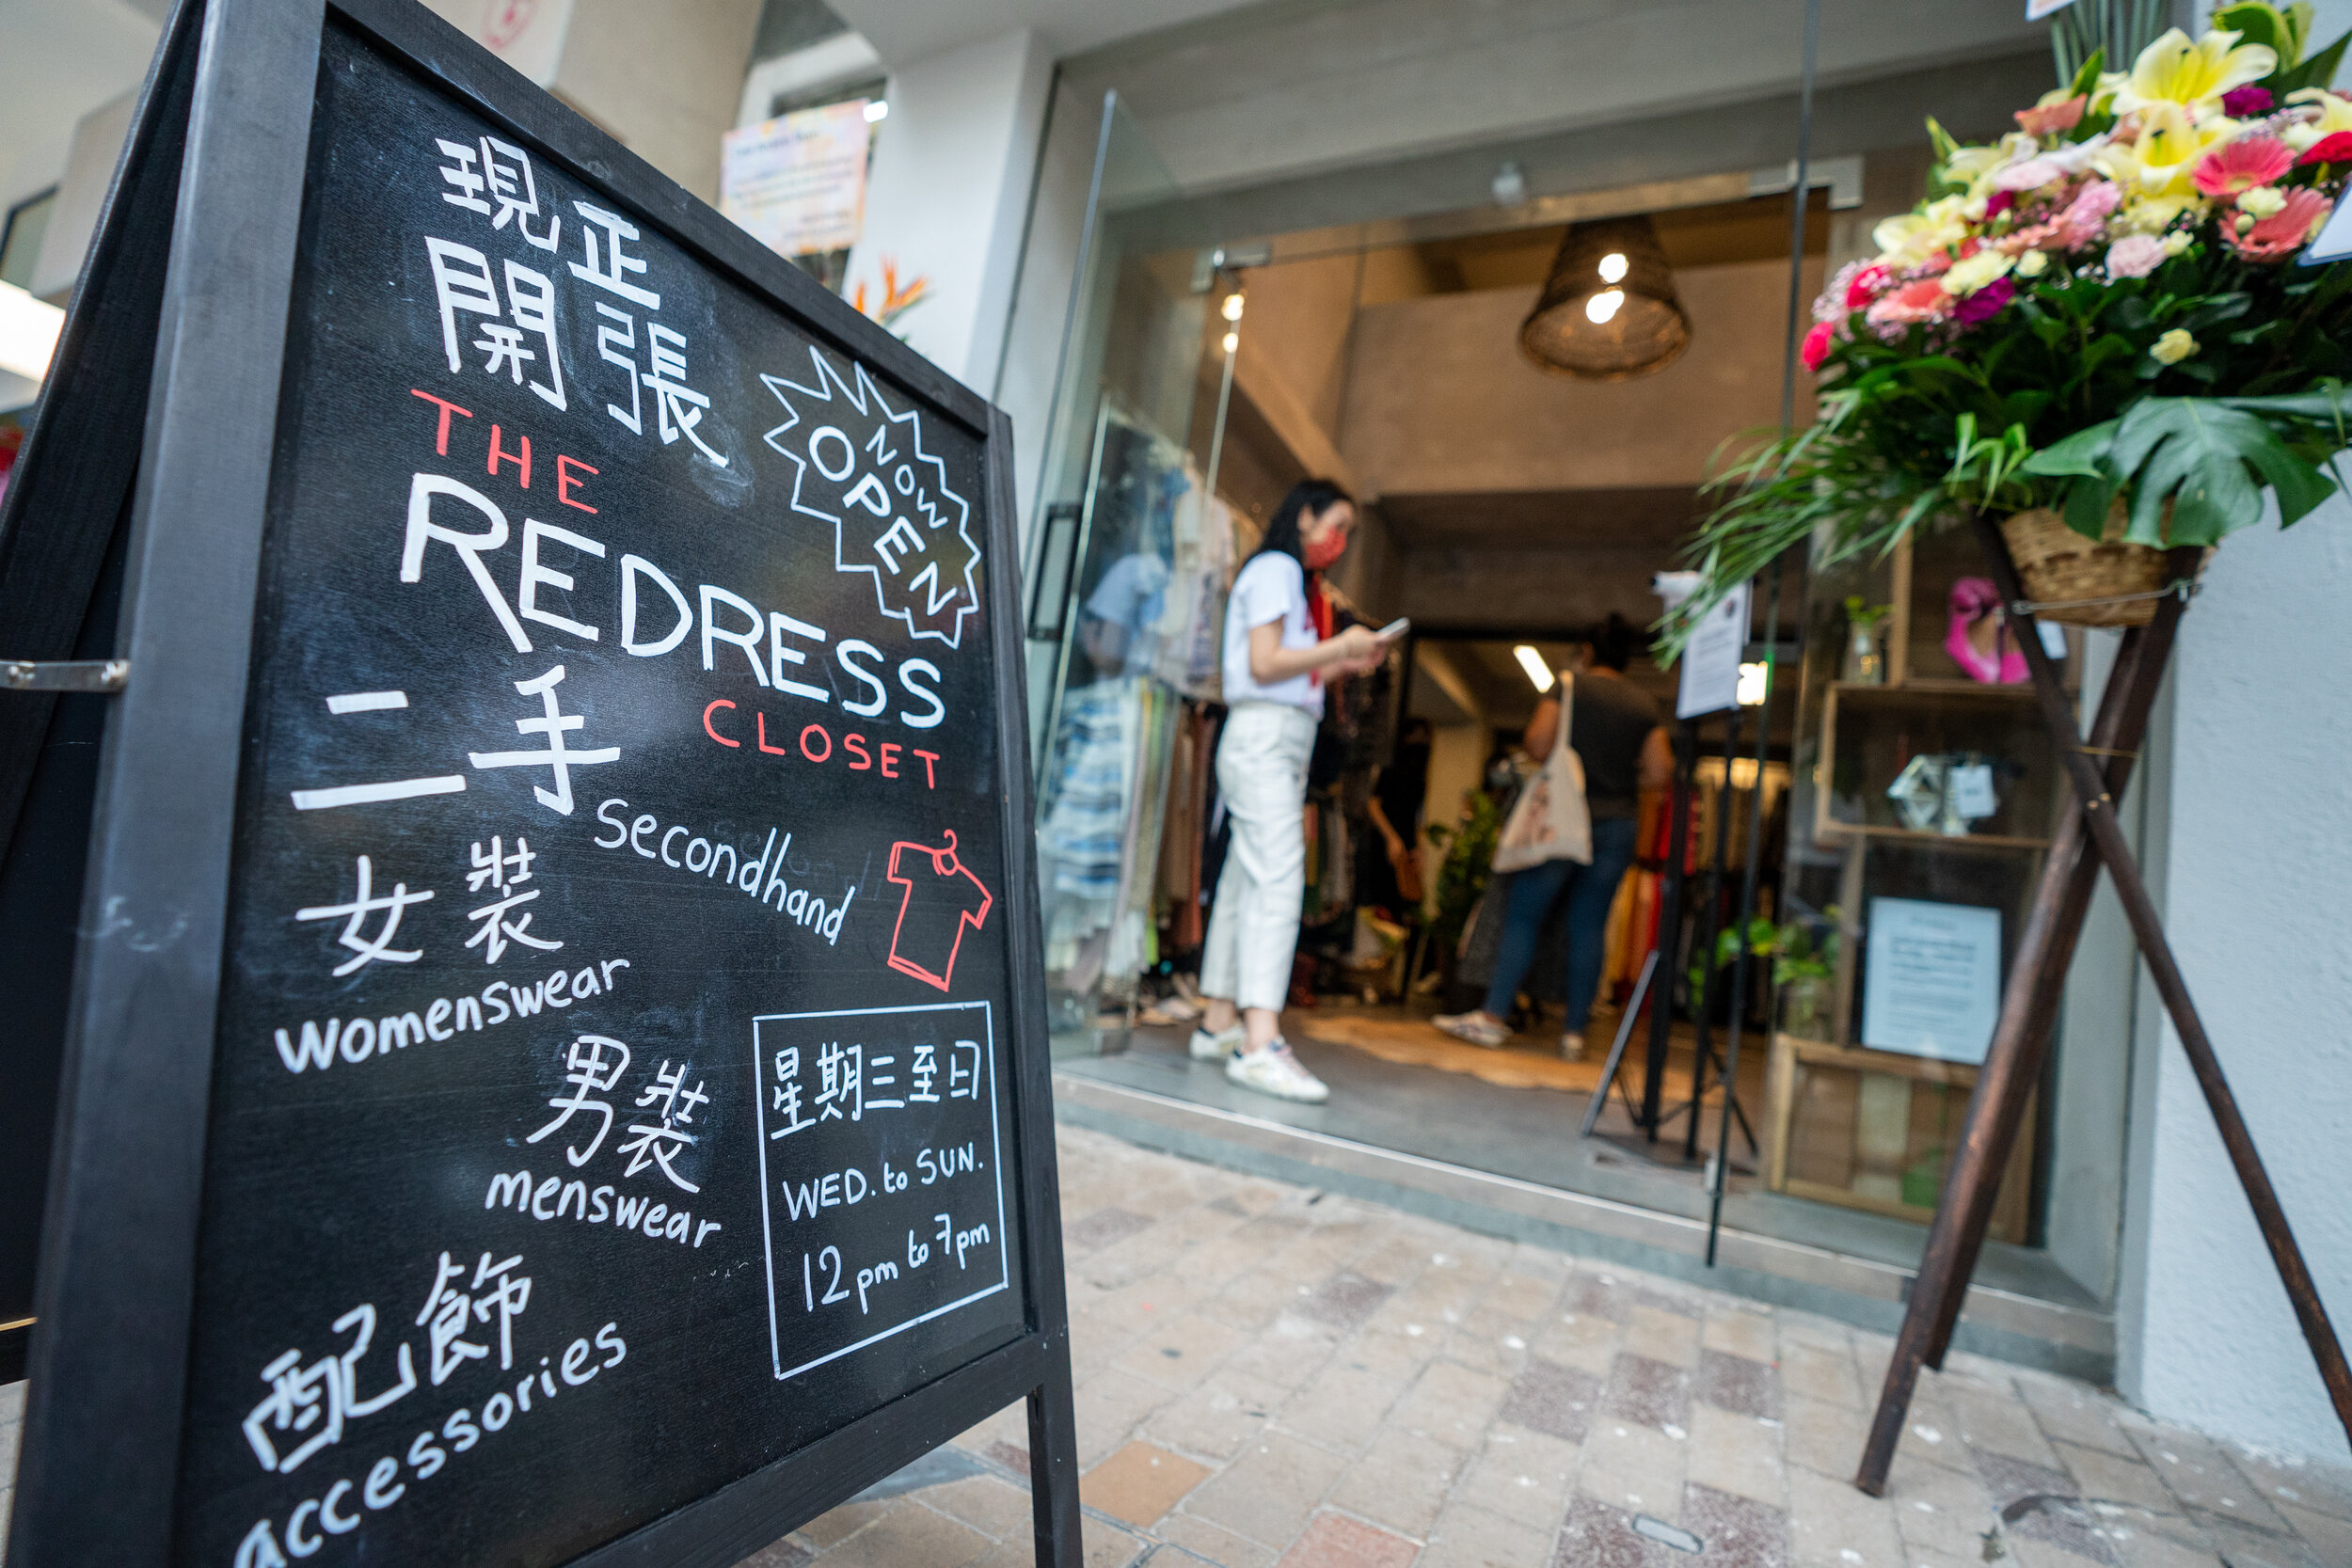 Celebrate Earth Day with the Redress Closet by enjoying preloved clothing, Sham Shui Po, Kowloon, Hong Kong